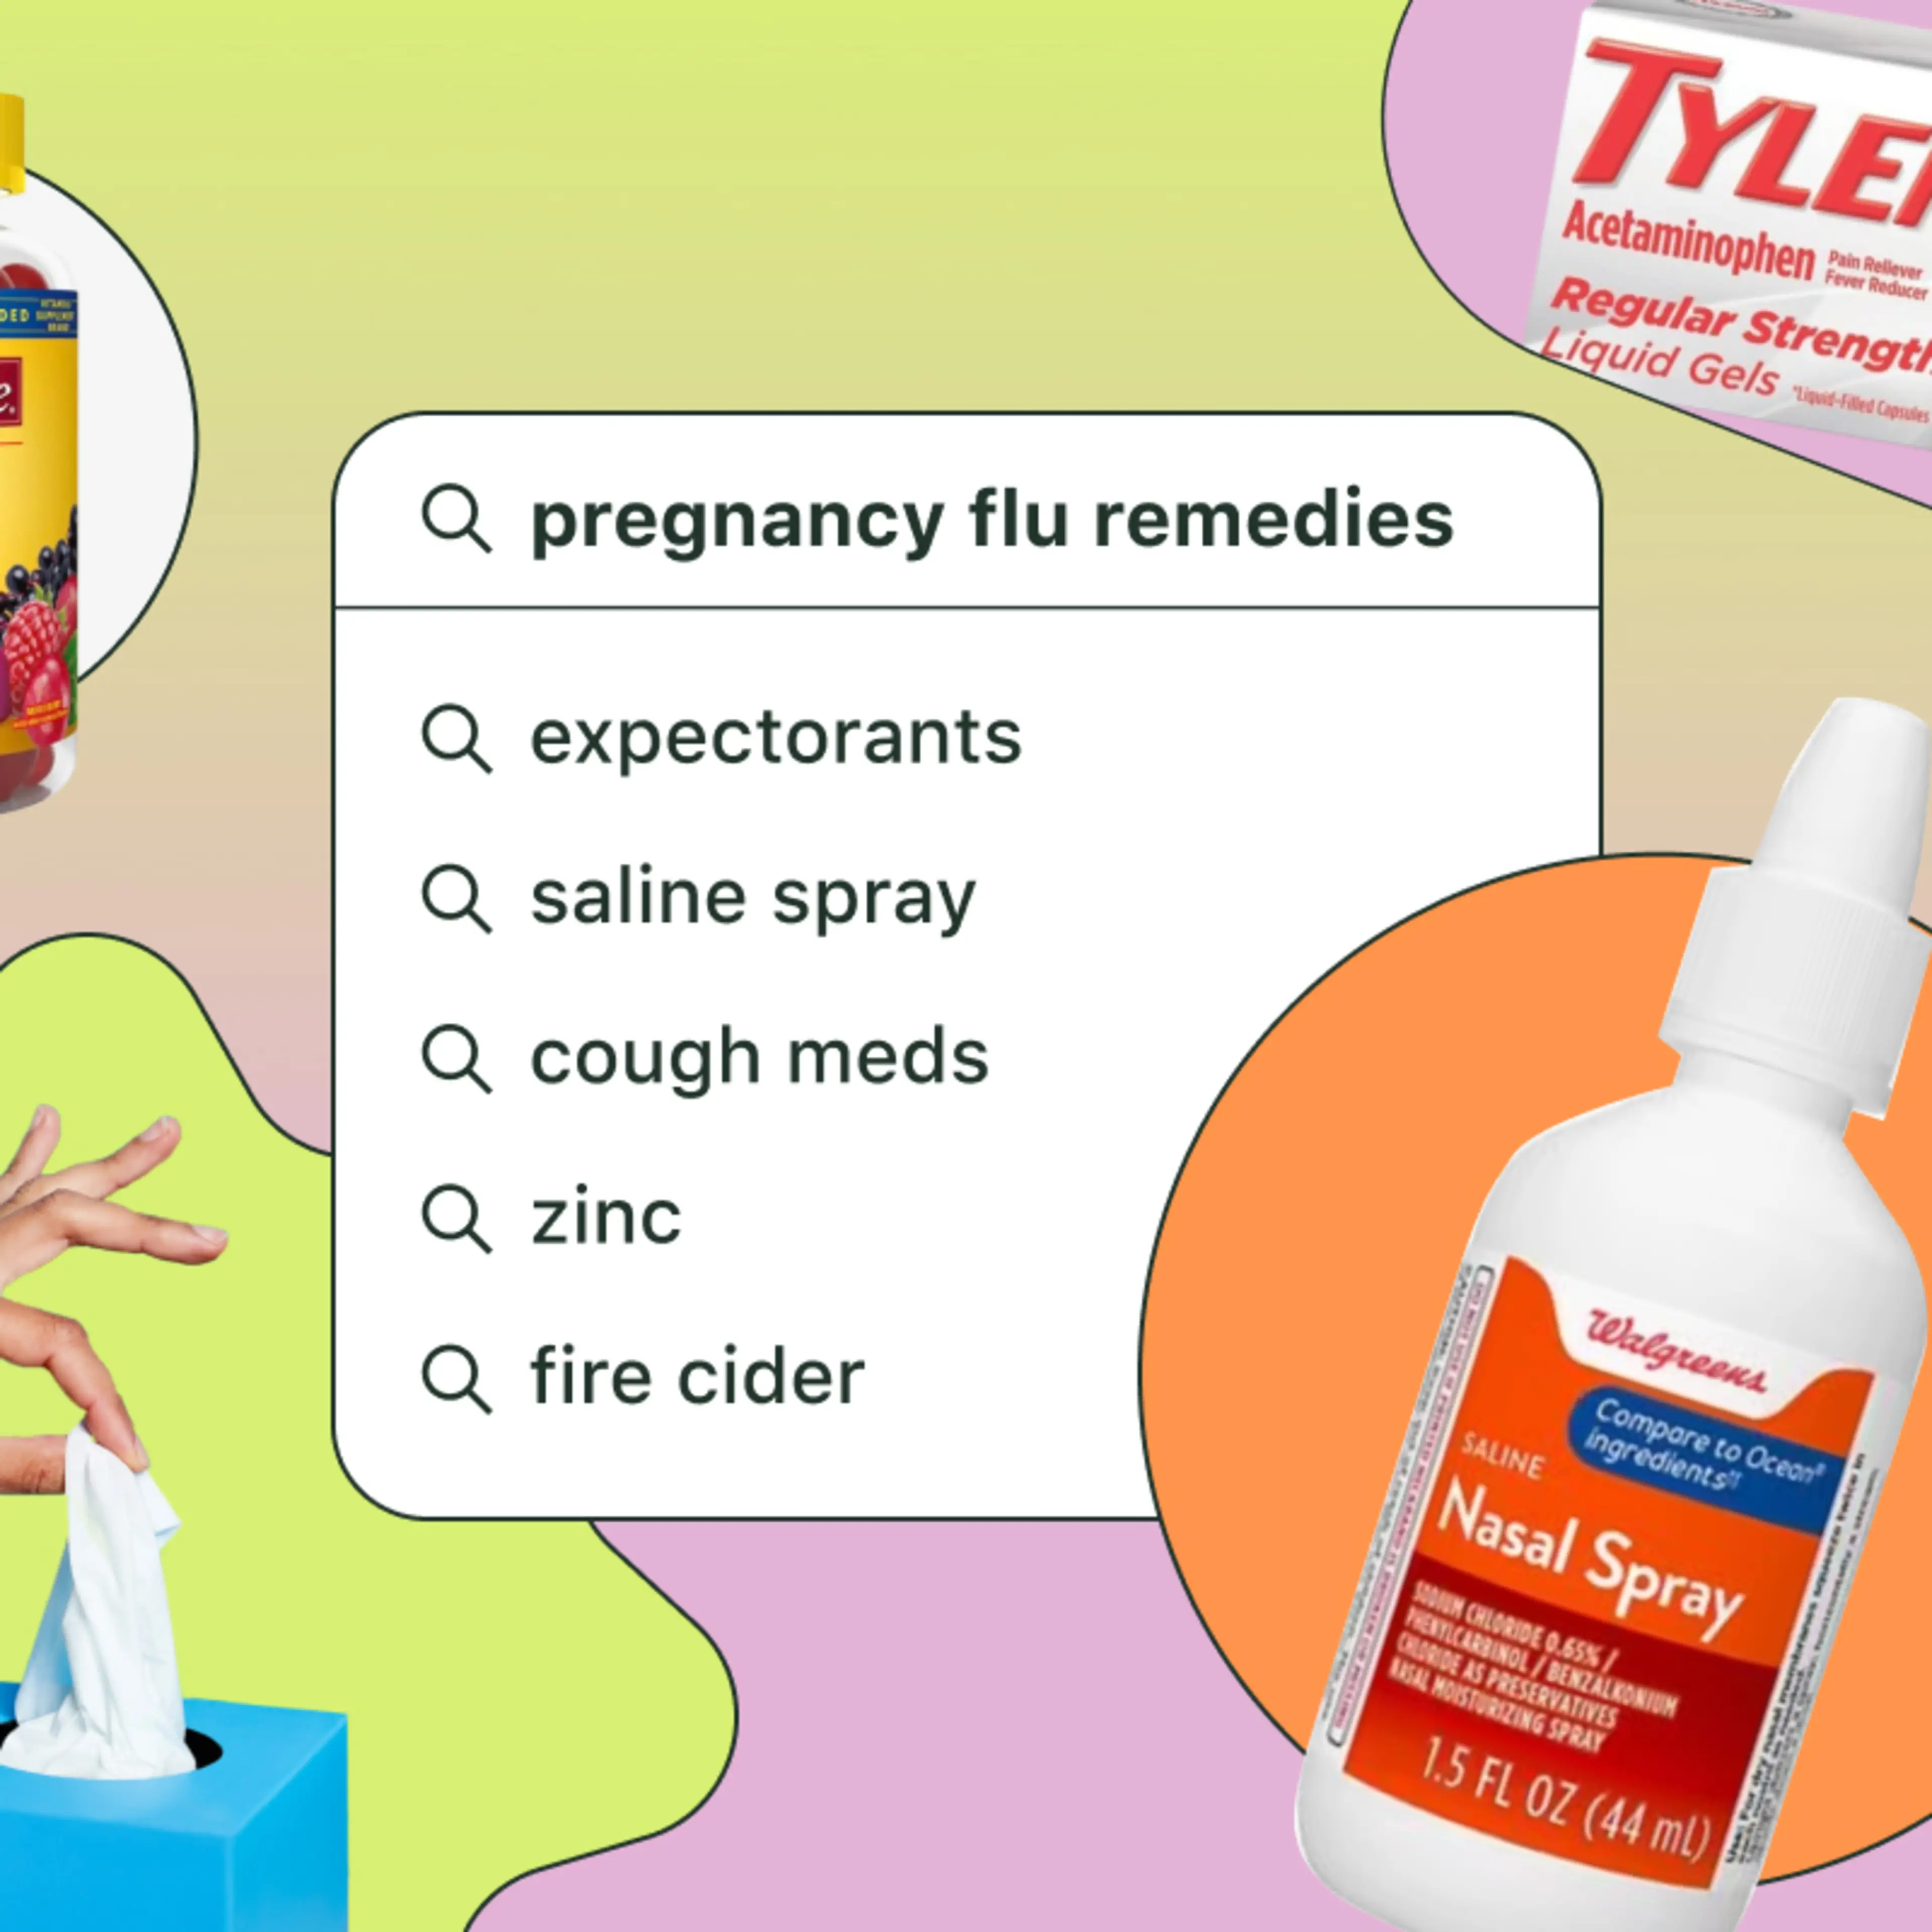 Your Definitive Guide to Pregnancy-Safe Cold & Flu Remedies